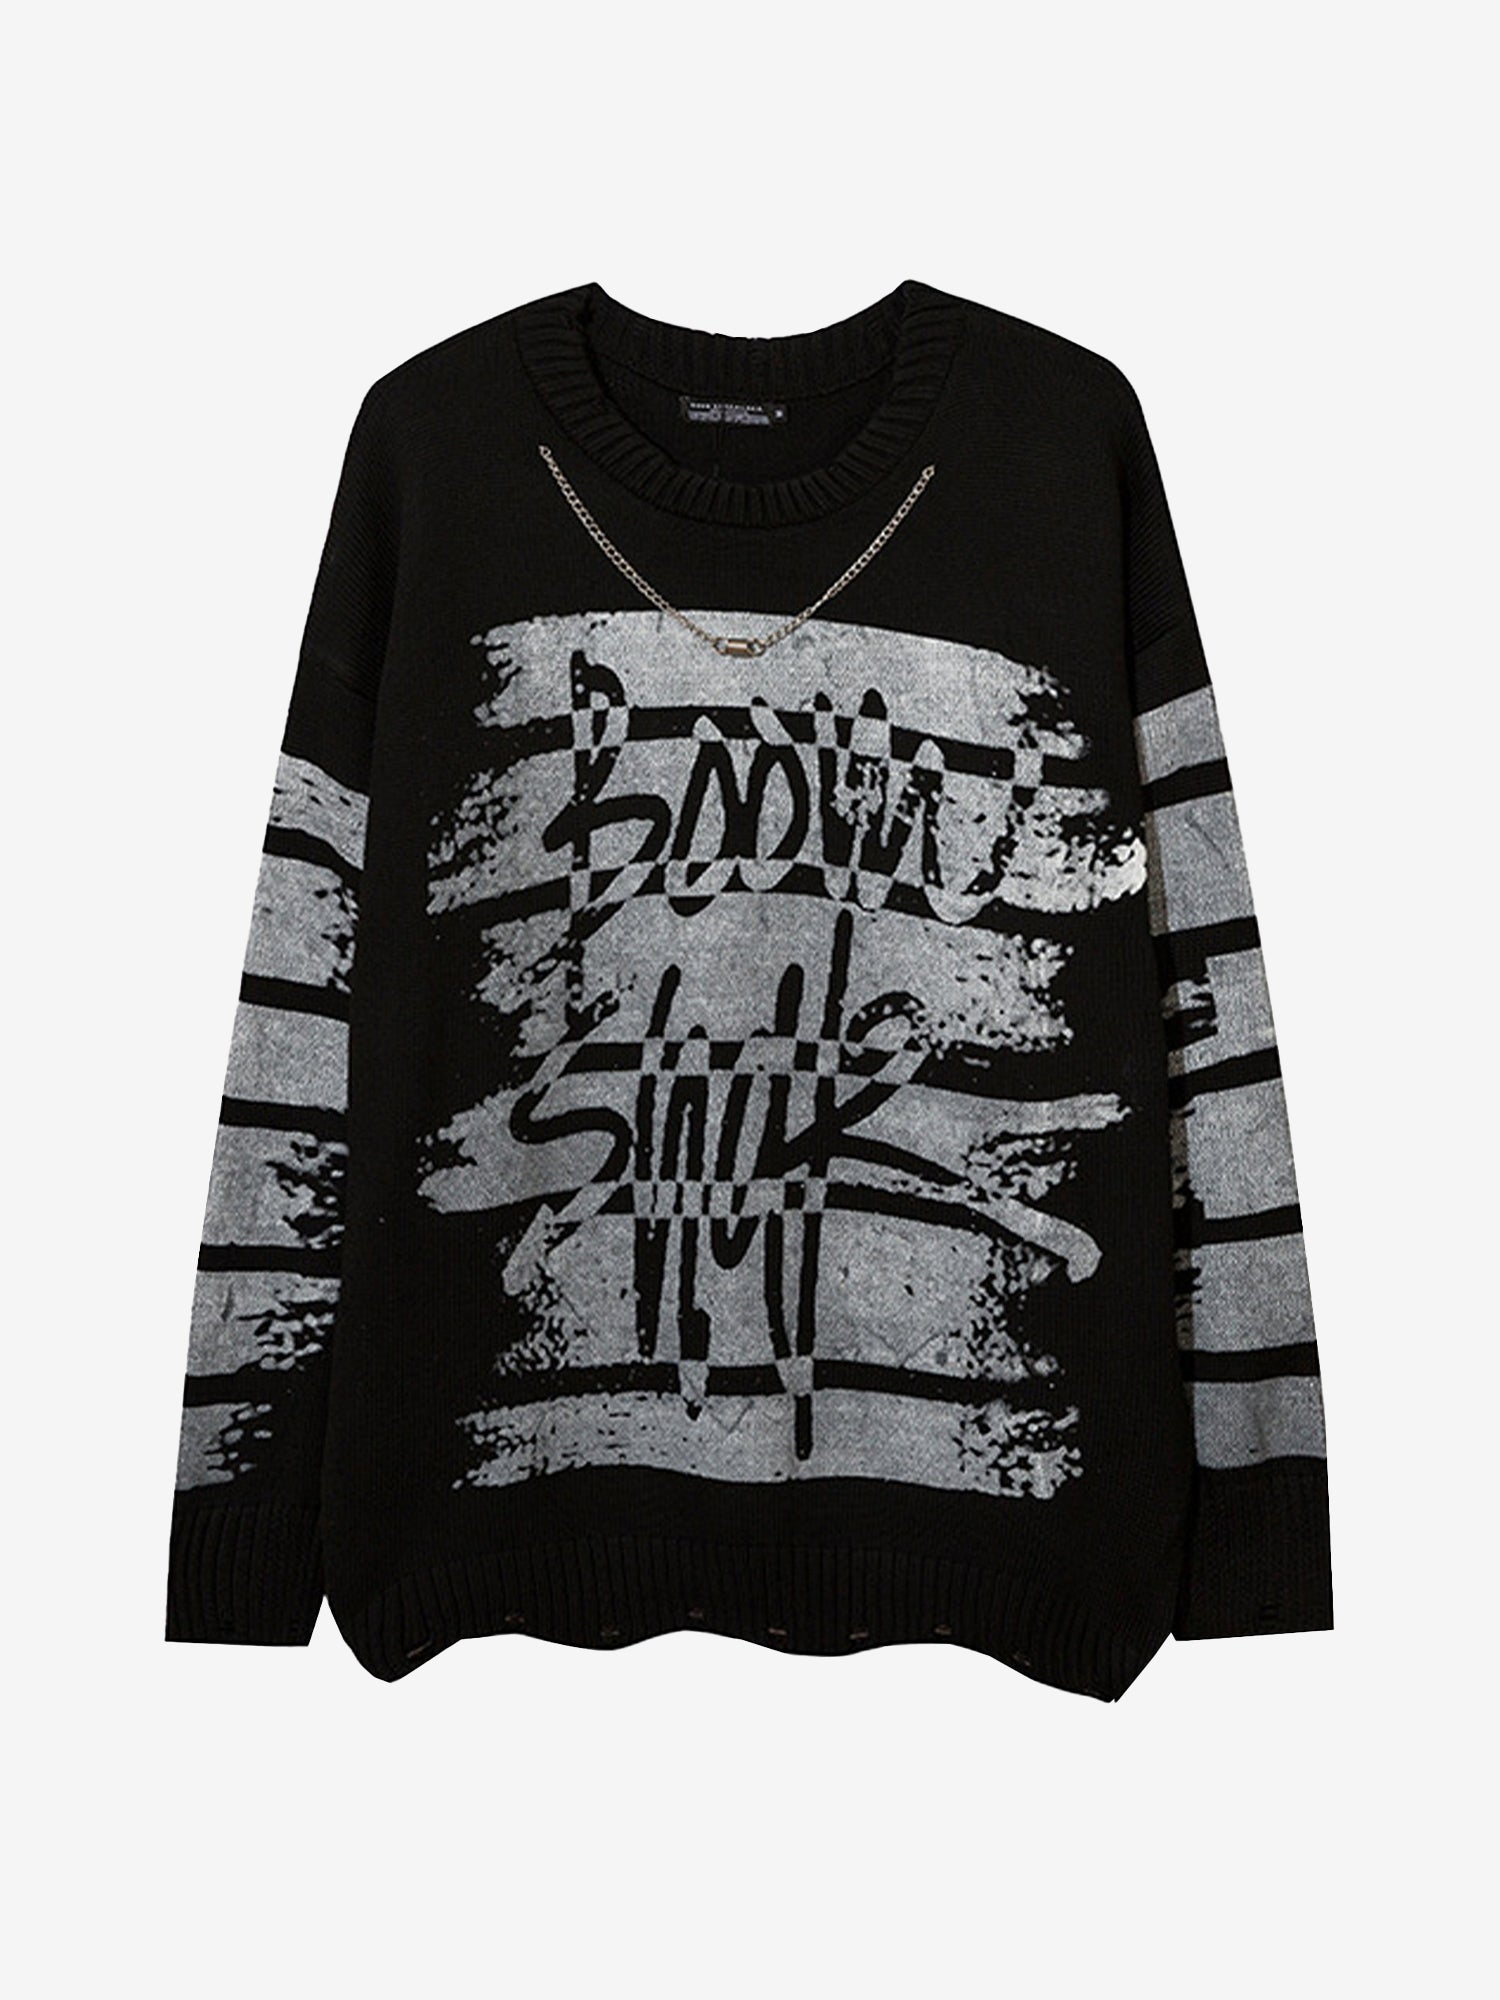 JUSTNOTAG Hiphop Letter Cotton Round Neck Sweaters